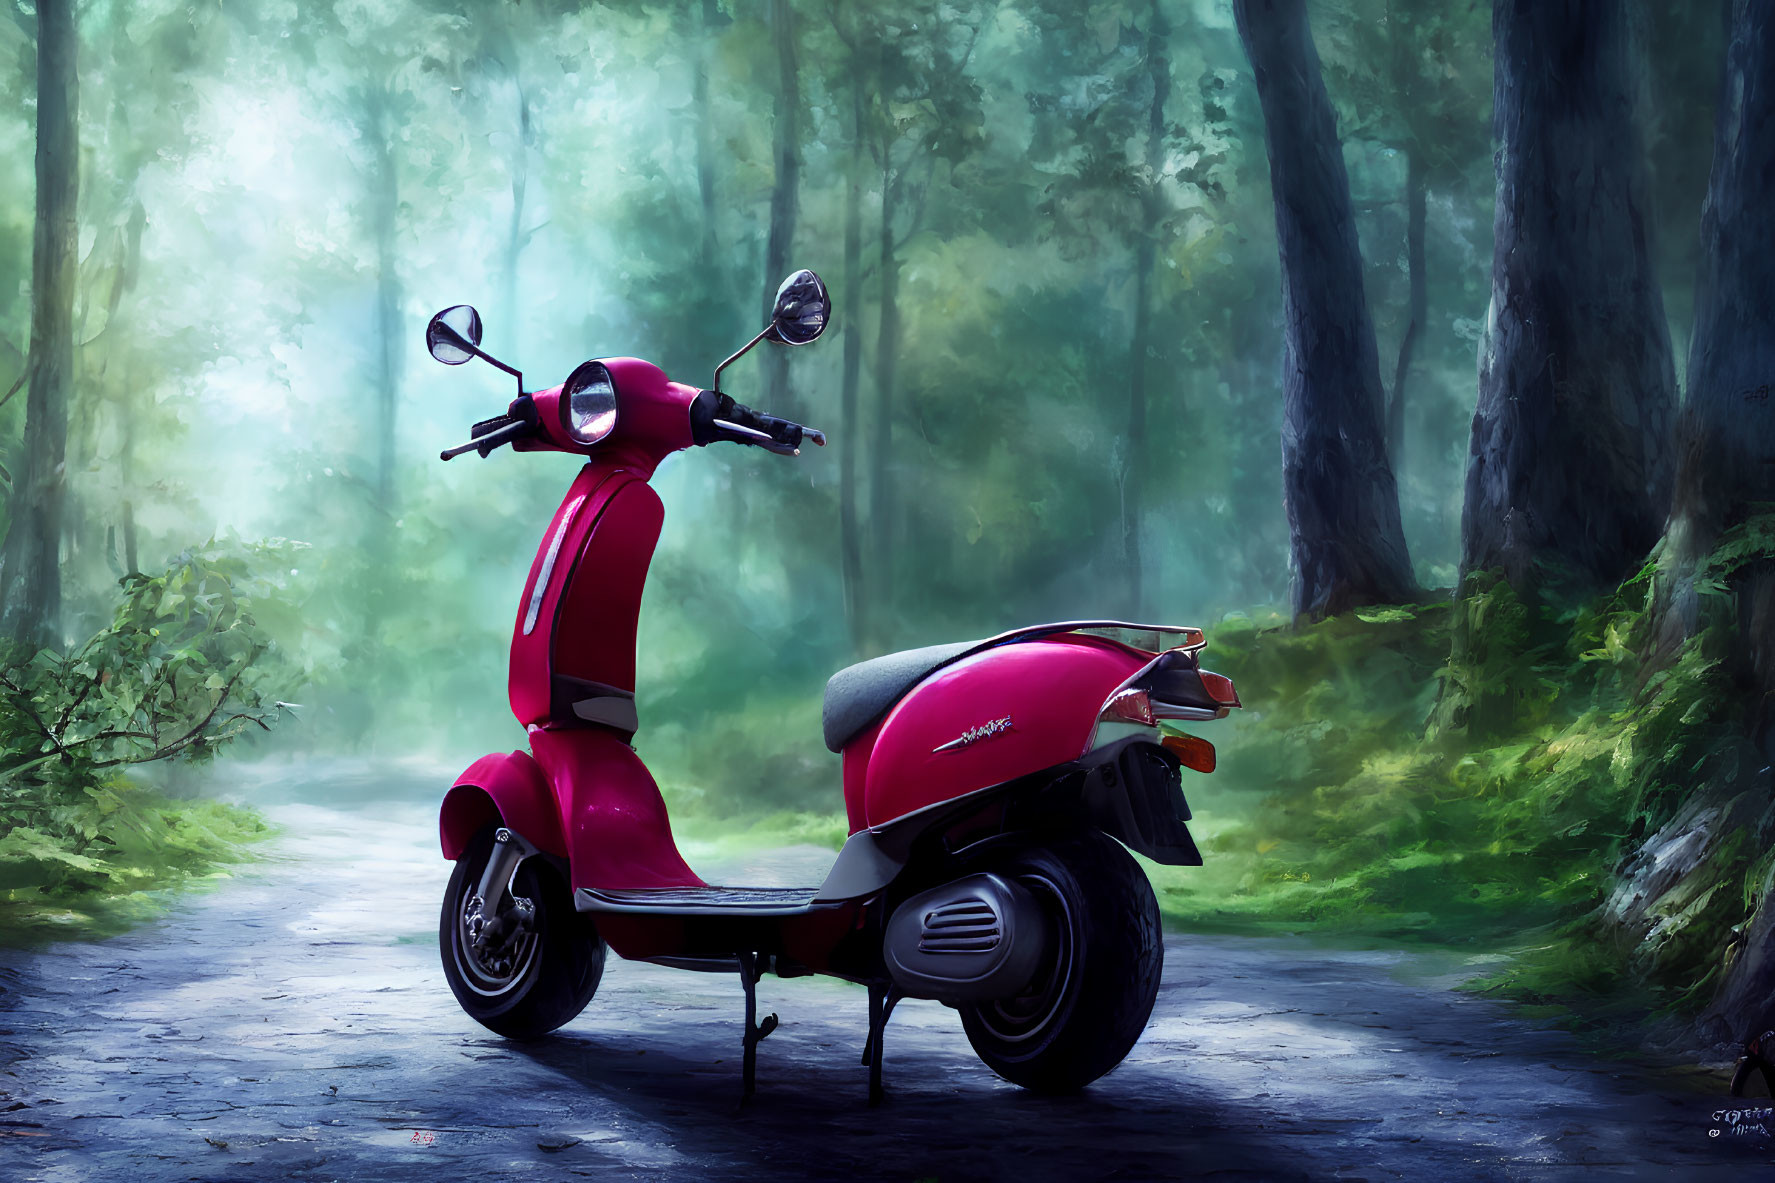 Red Scooter on Misty Forest Path in Soft Light